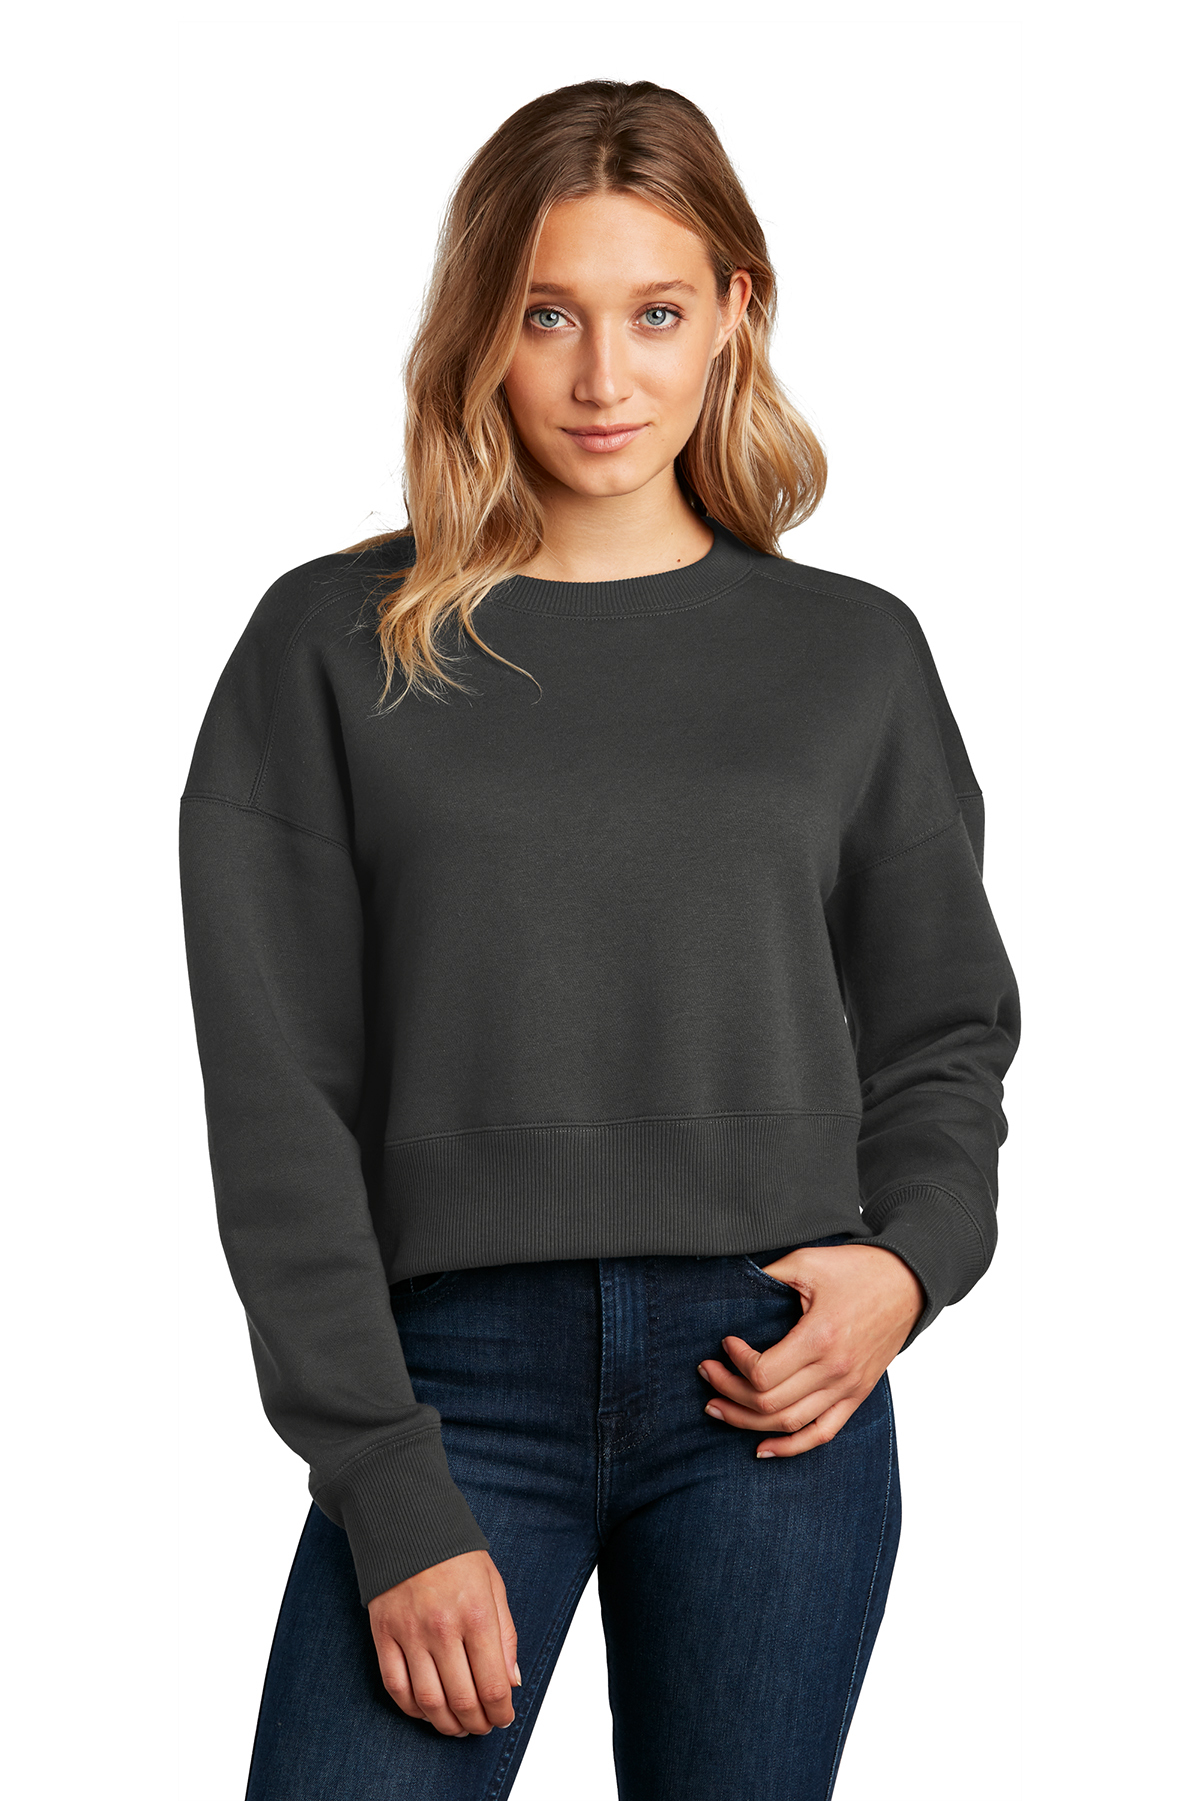 District® Women’s Perfect Weight® Fleece Cropped Crew